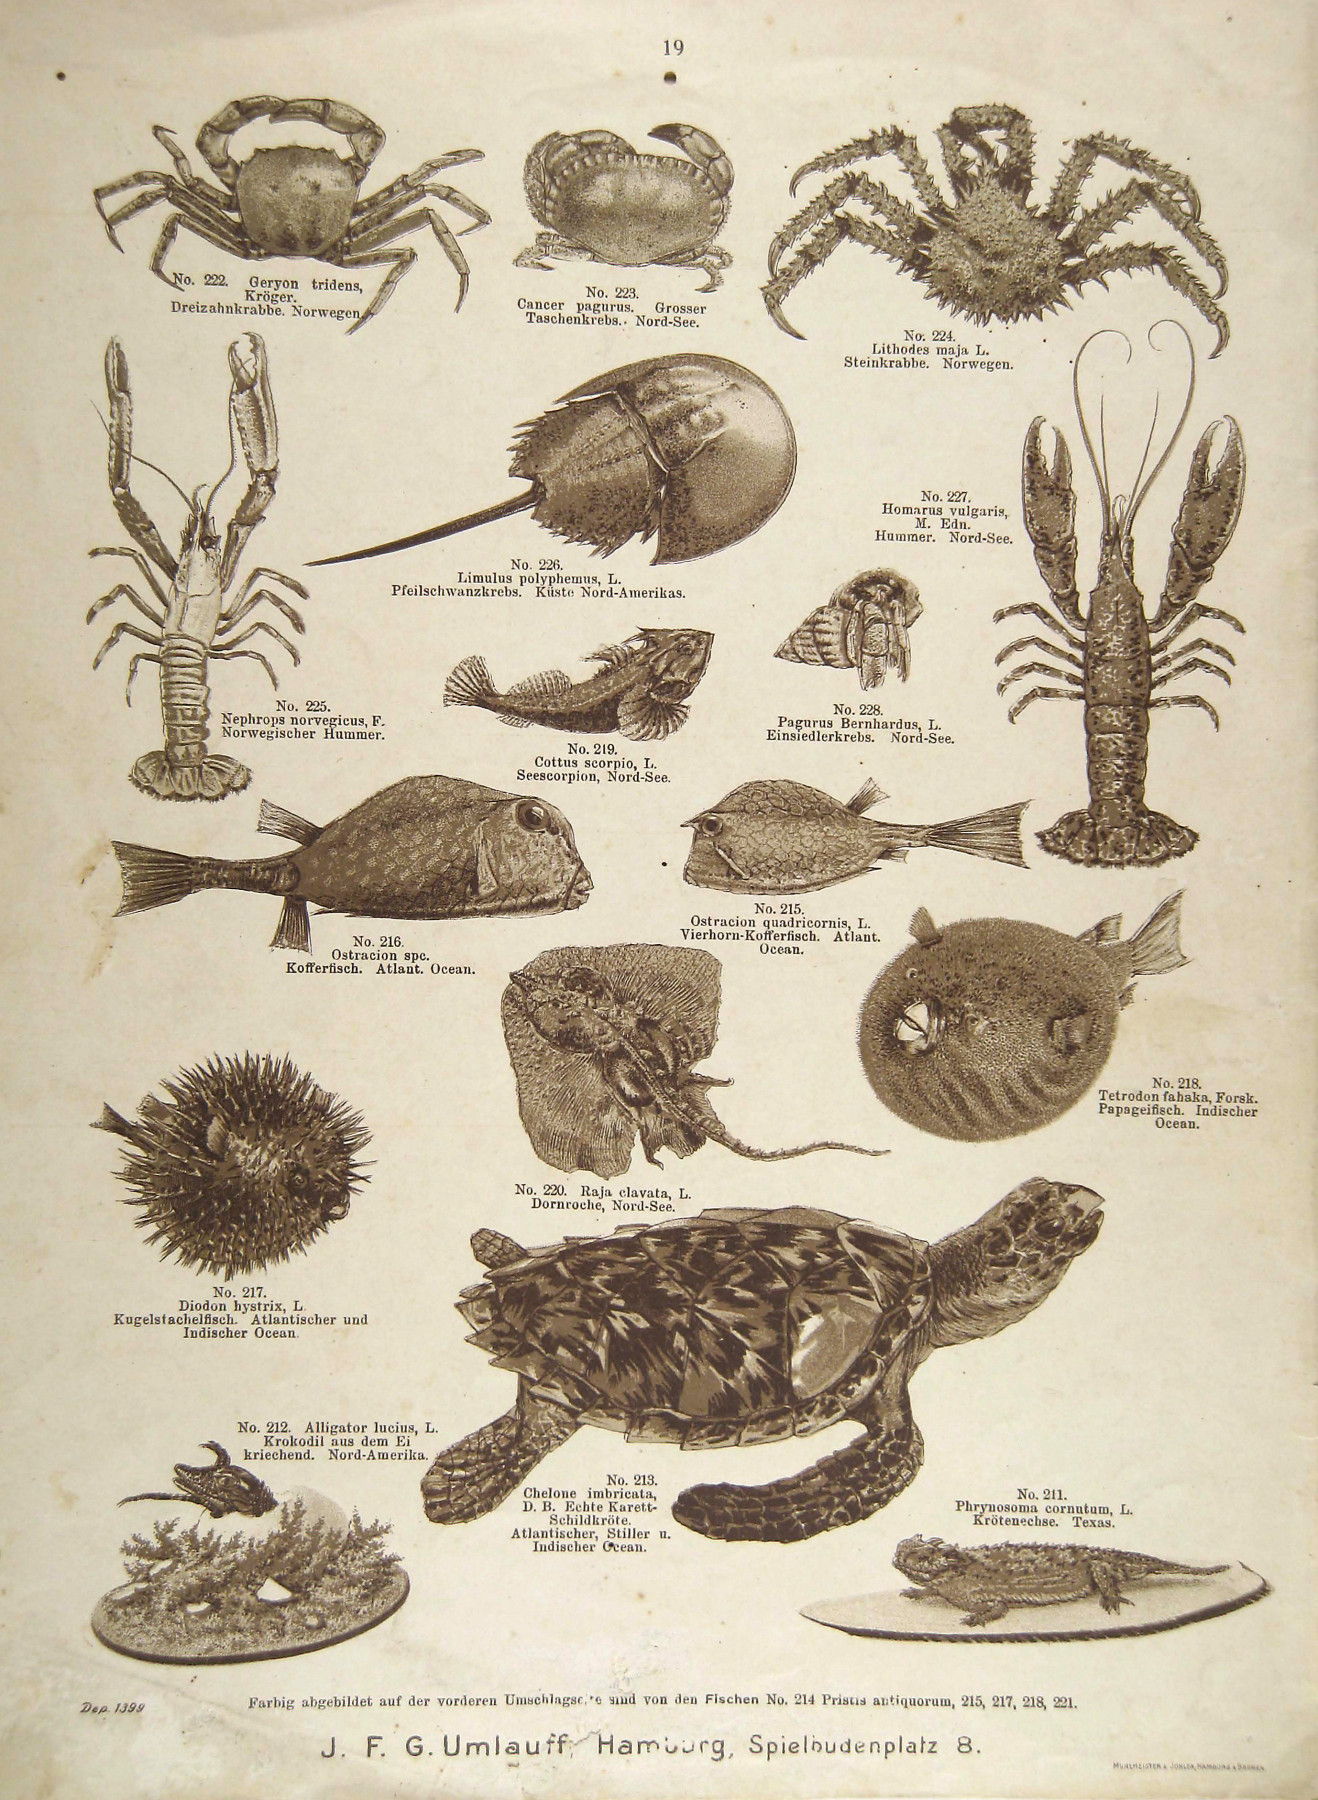 Black-and-white pictures of various fish, crabs, and prawns, as well as other sea creatures, in a sales catalogue issued by the natural history dealer J.F.G. Umlauff furnished with sales details and descriptions.